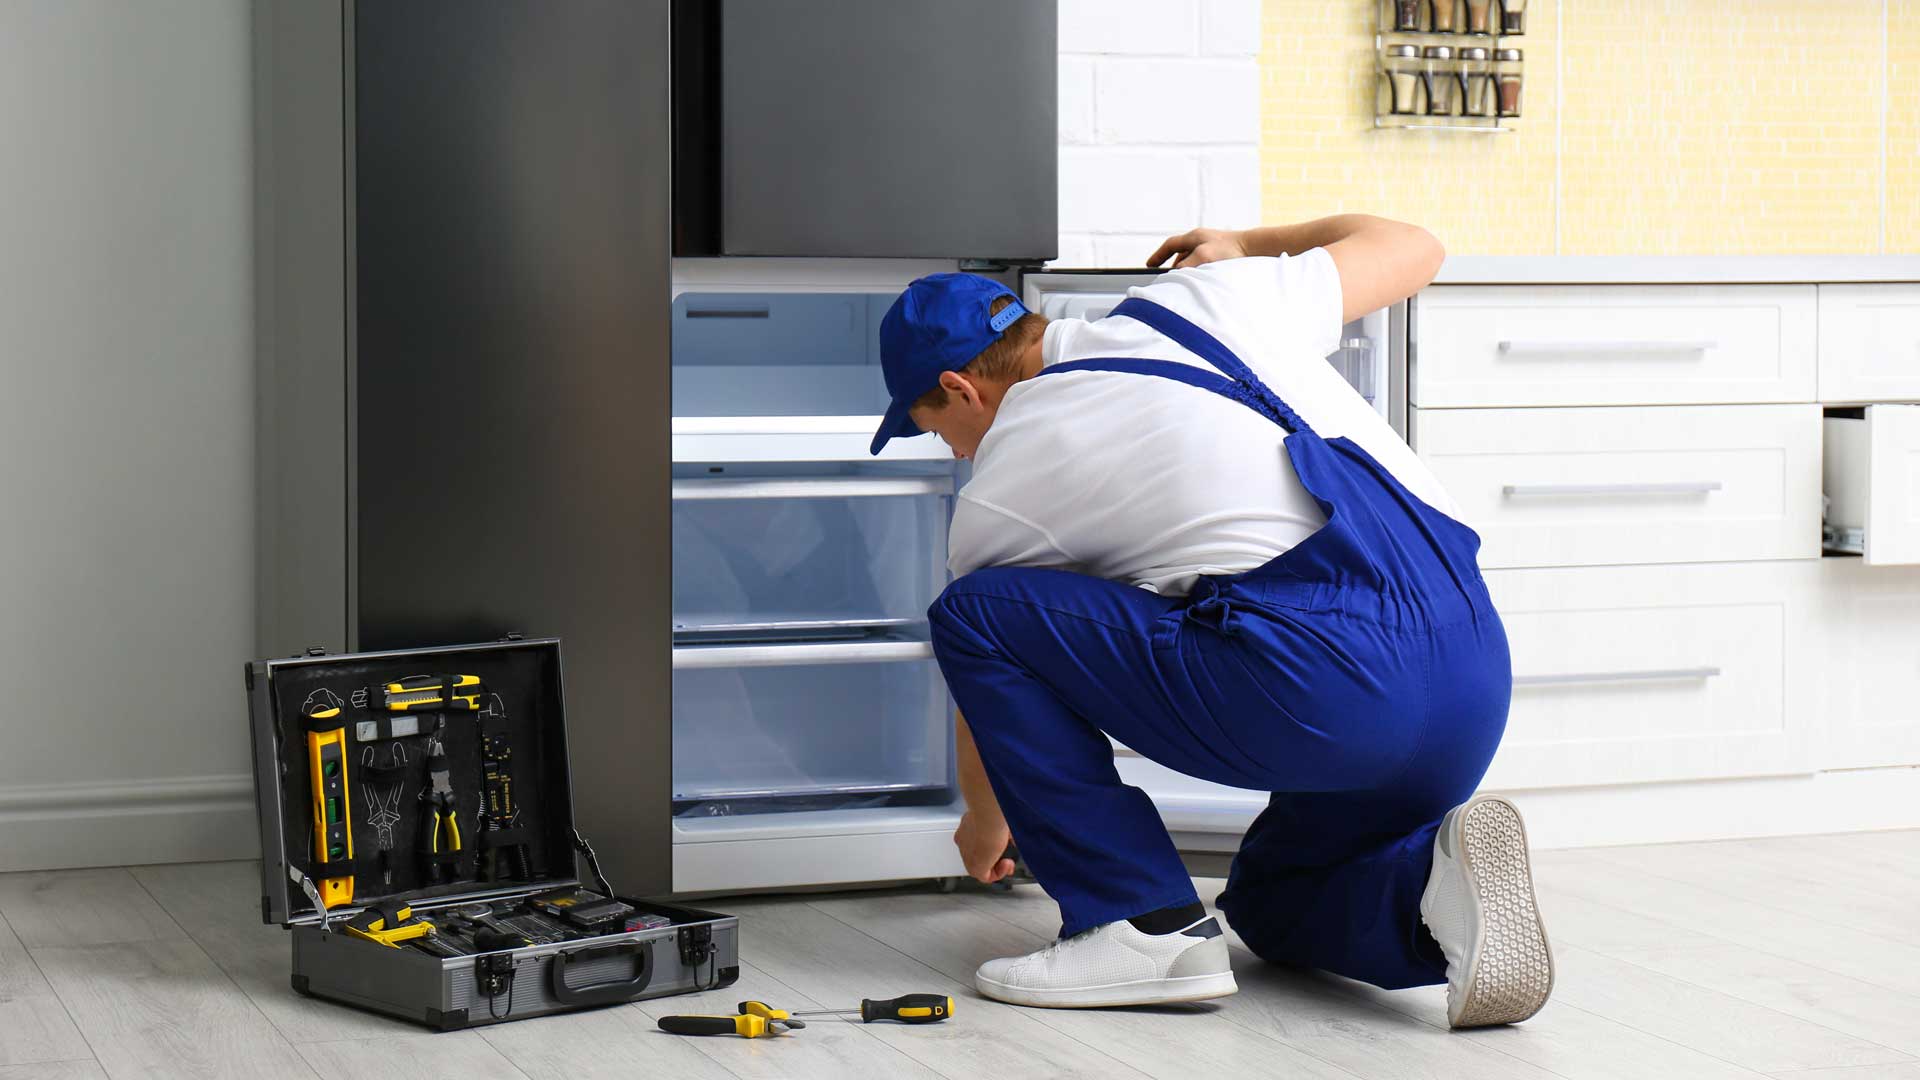 a man fixing a refrigerator in a kitchen.